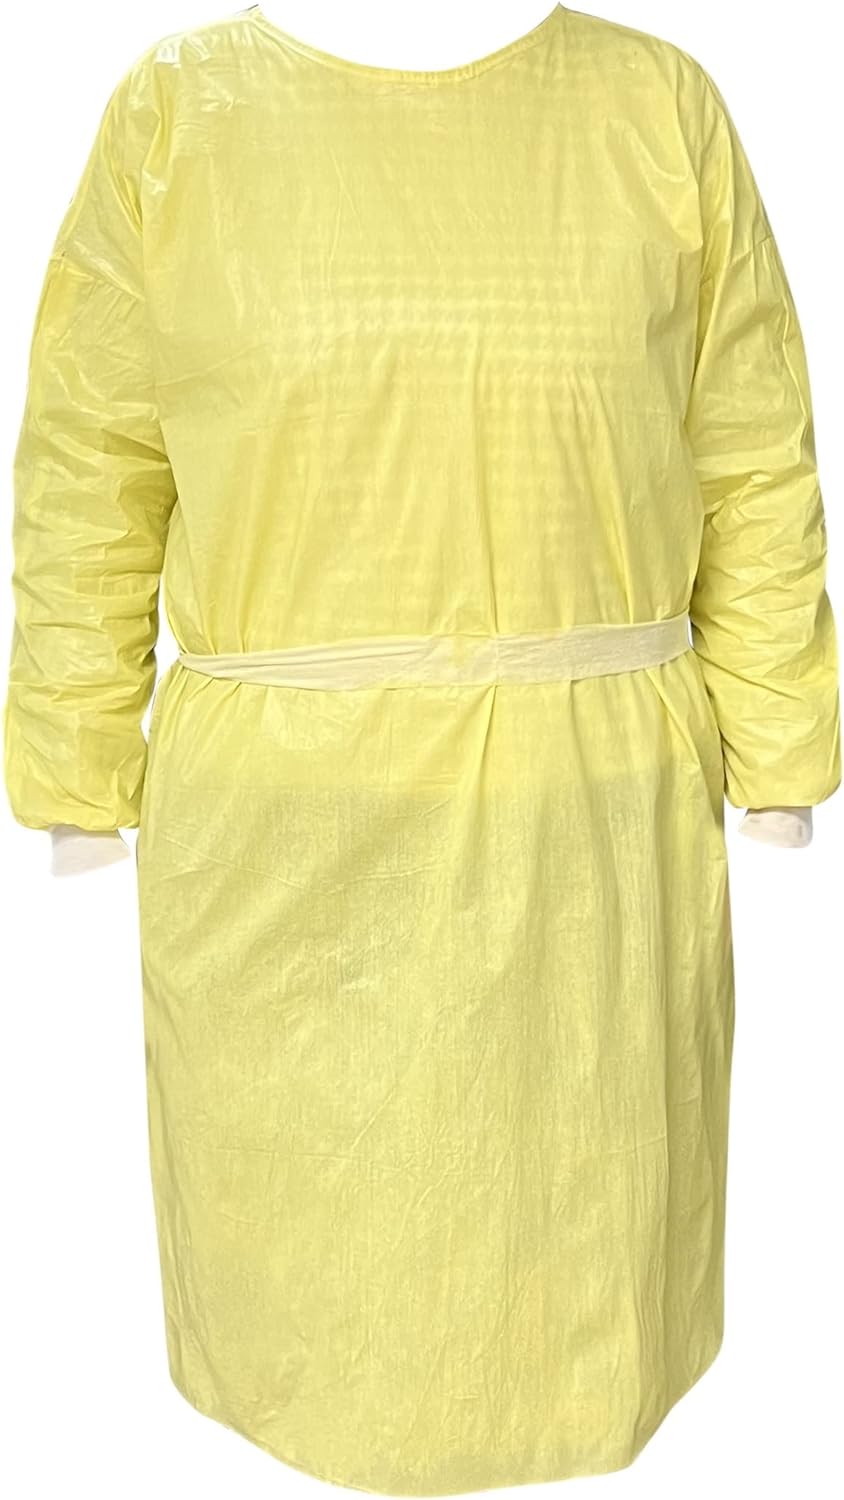 Generic SinoProtection Sino Protection Disposable Isolation Protective Gown Coverall with Knit Cuffs, Non Surgical, Latex Free, Fluid R